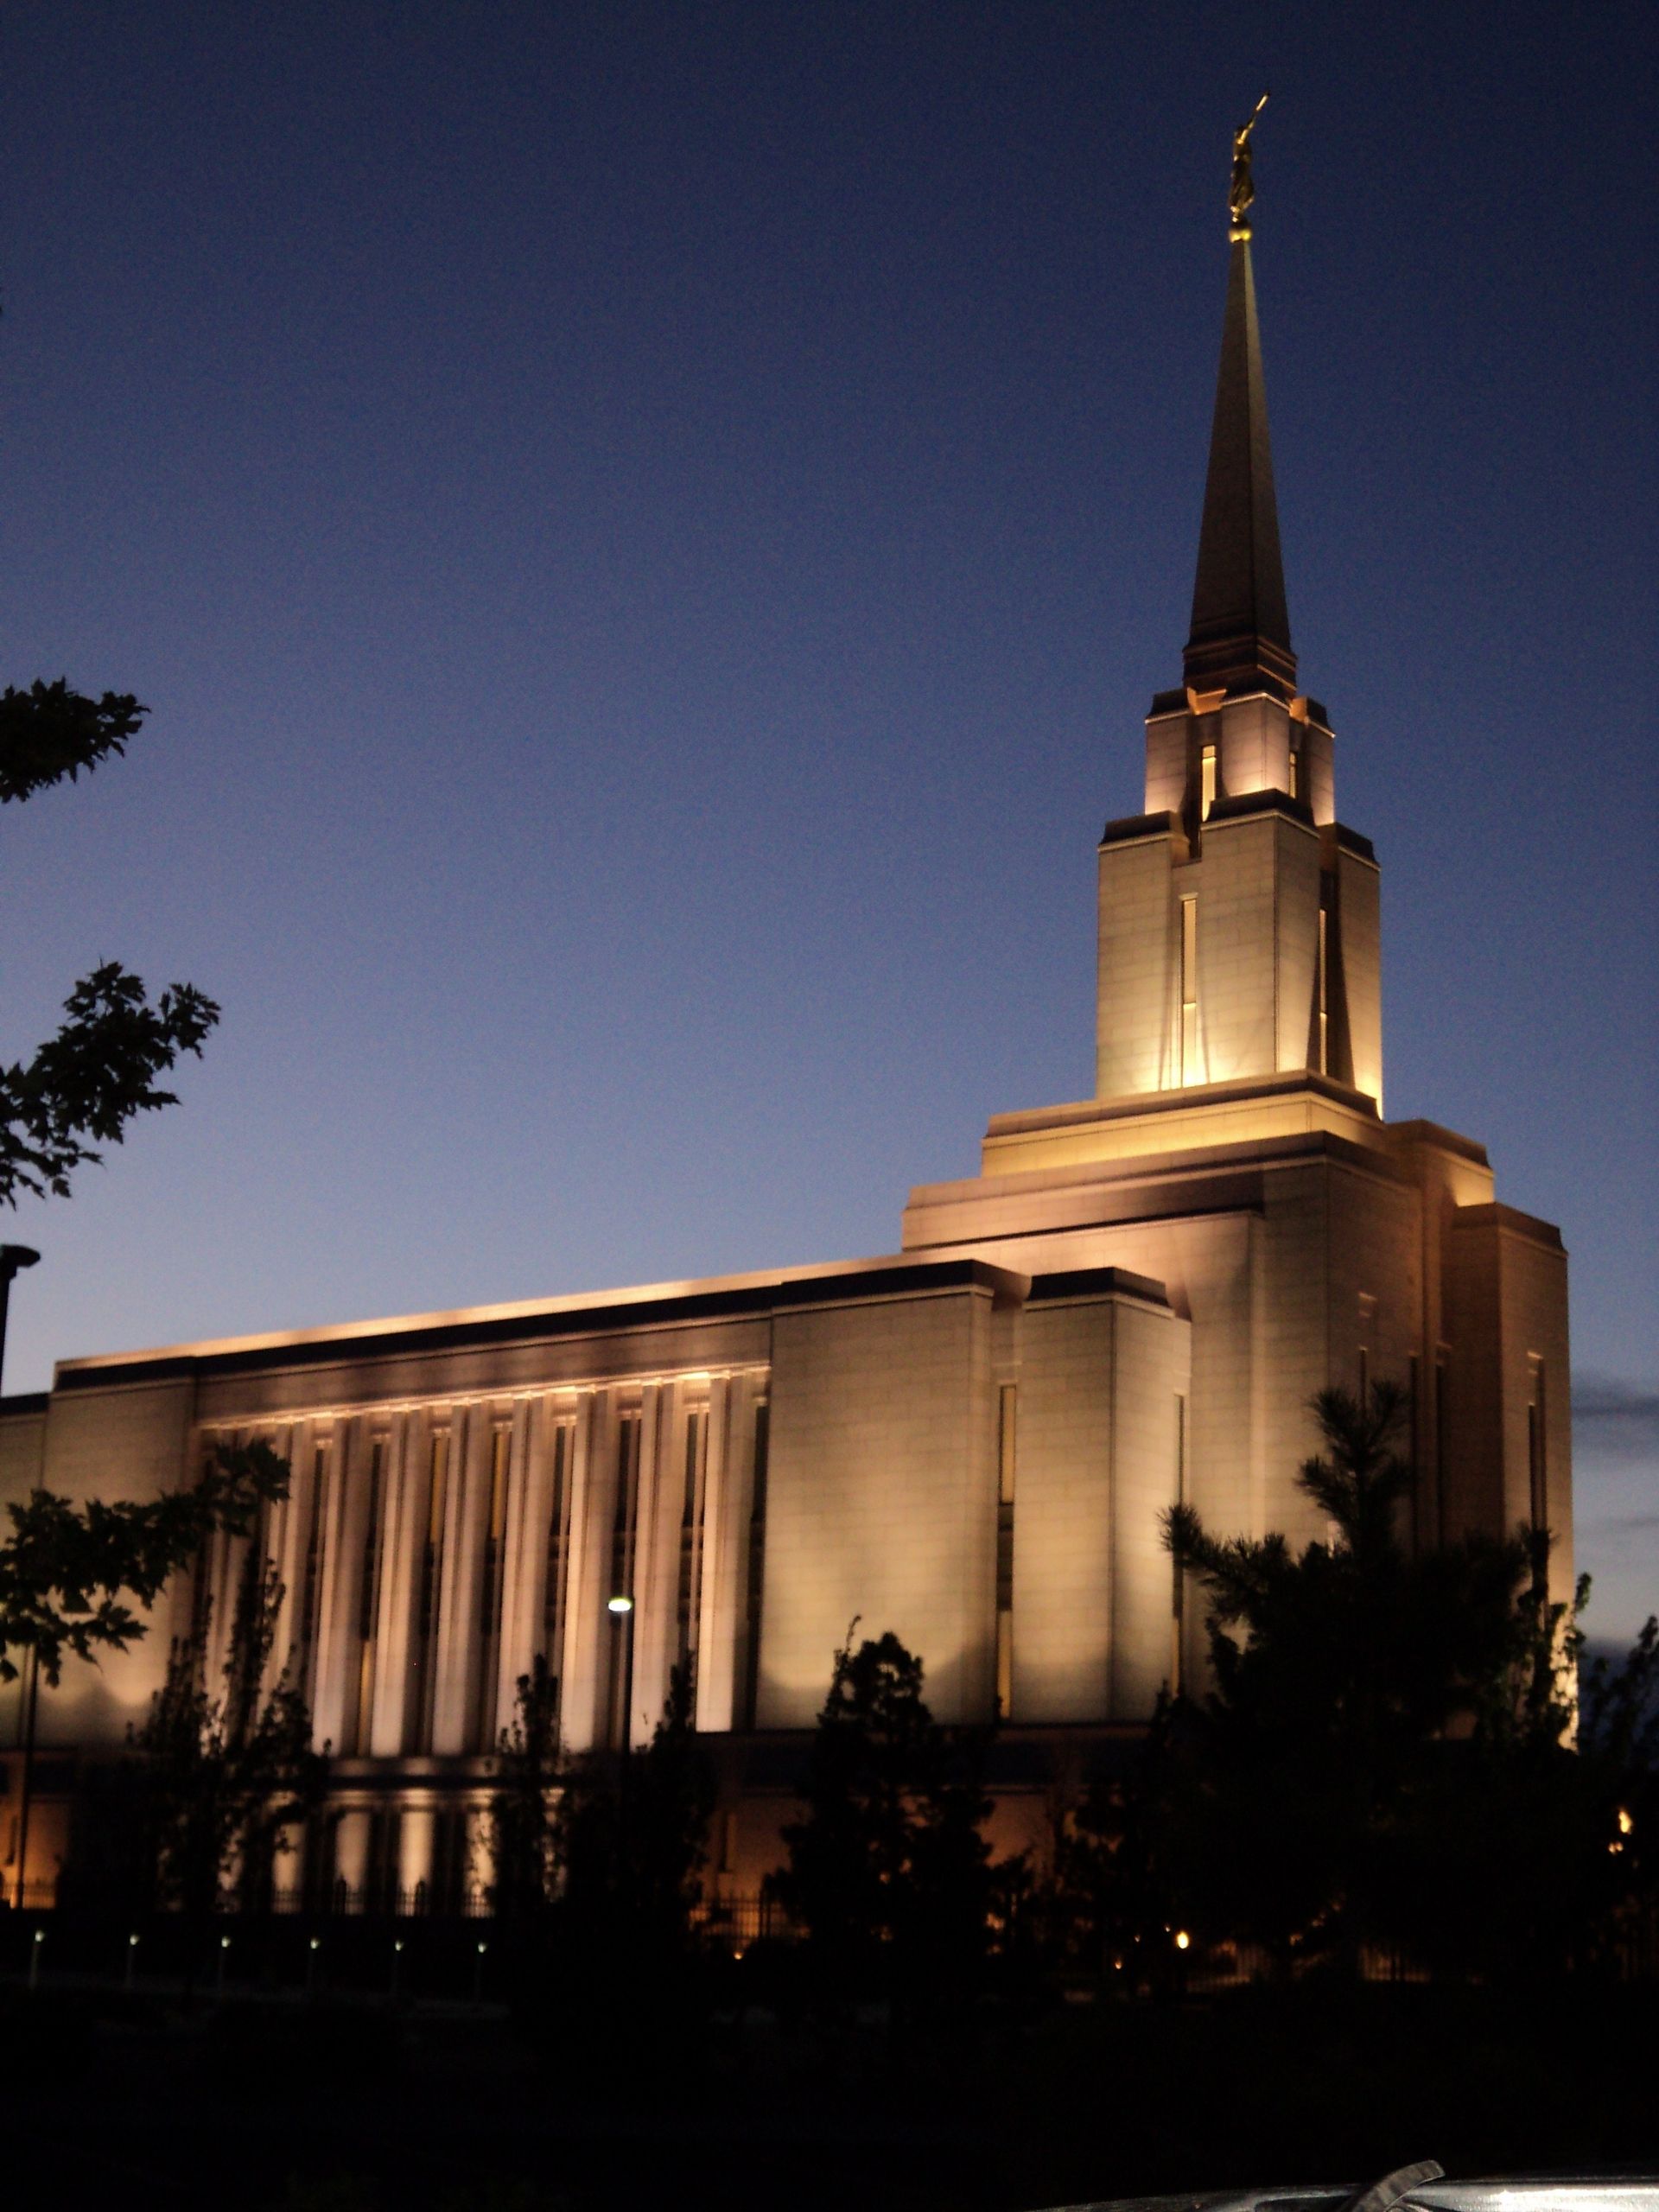 The Oquirrh Mountain Utah Temple side view, including scenery.